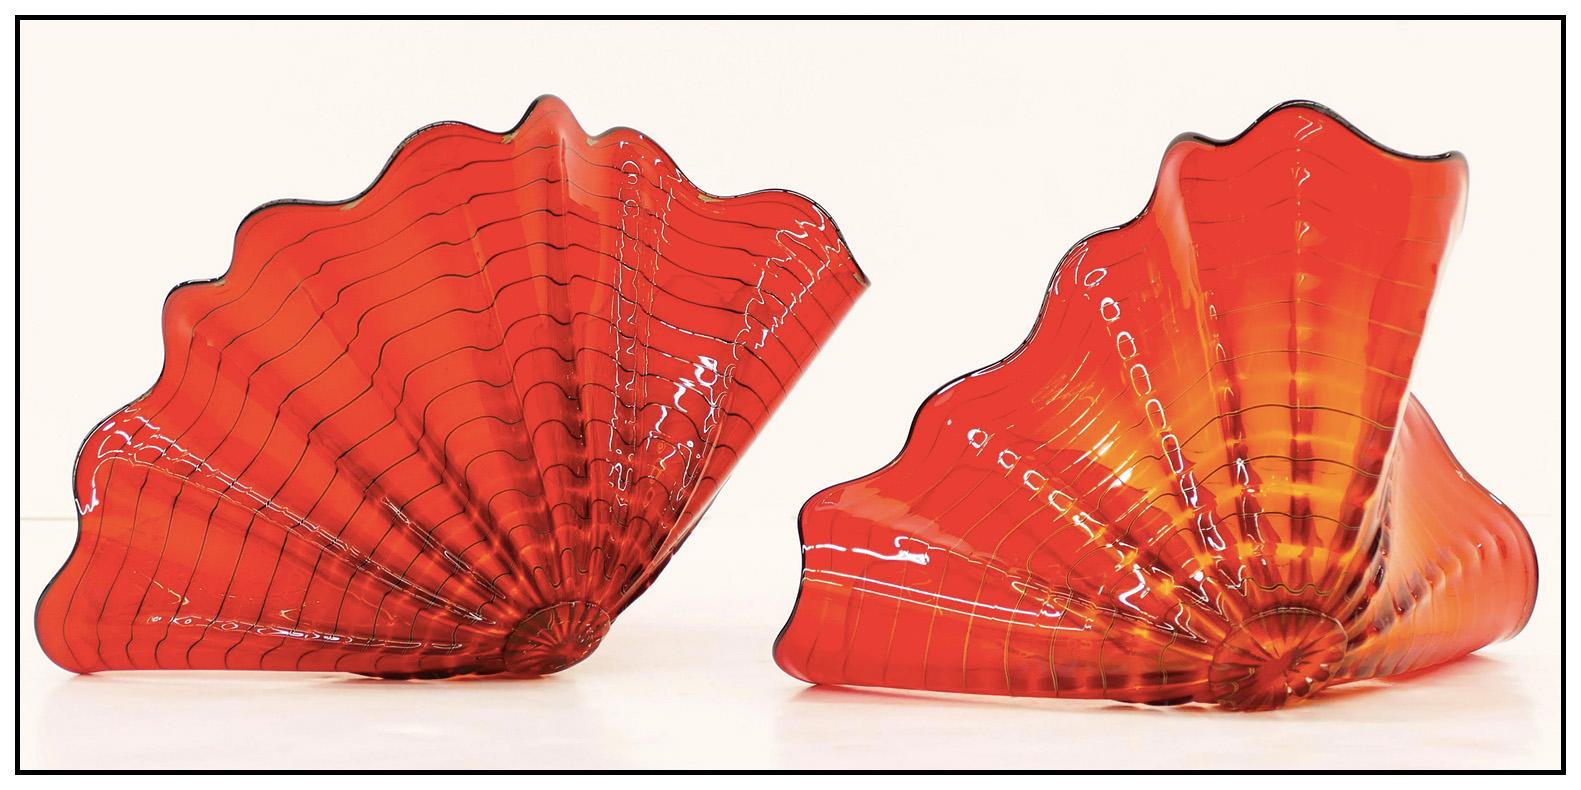 Dale Chihuly 2 Piece Original Persian Red Set Blown Glass Hand Signed Artwork 1